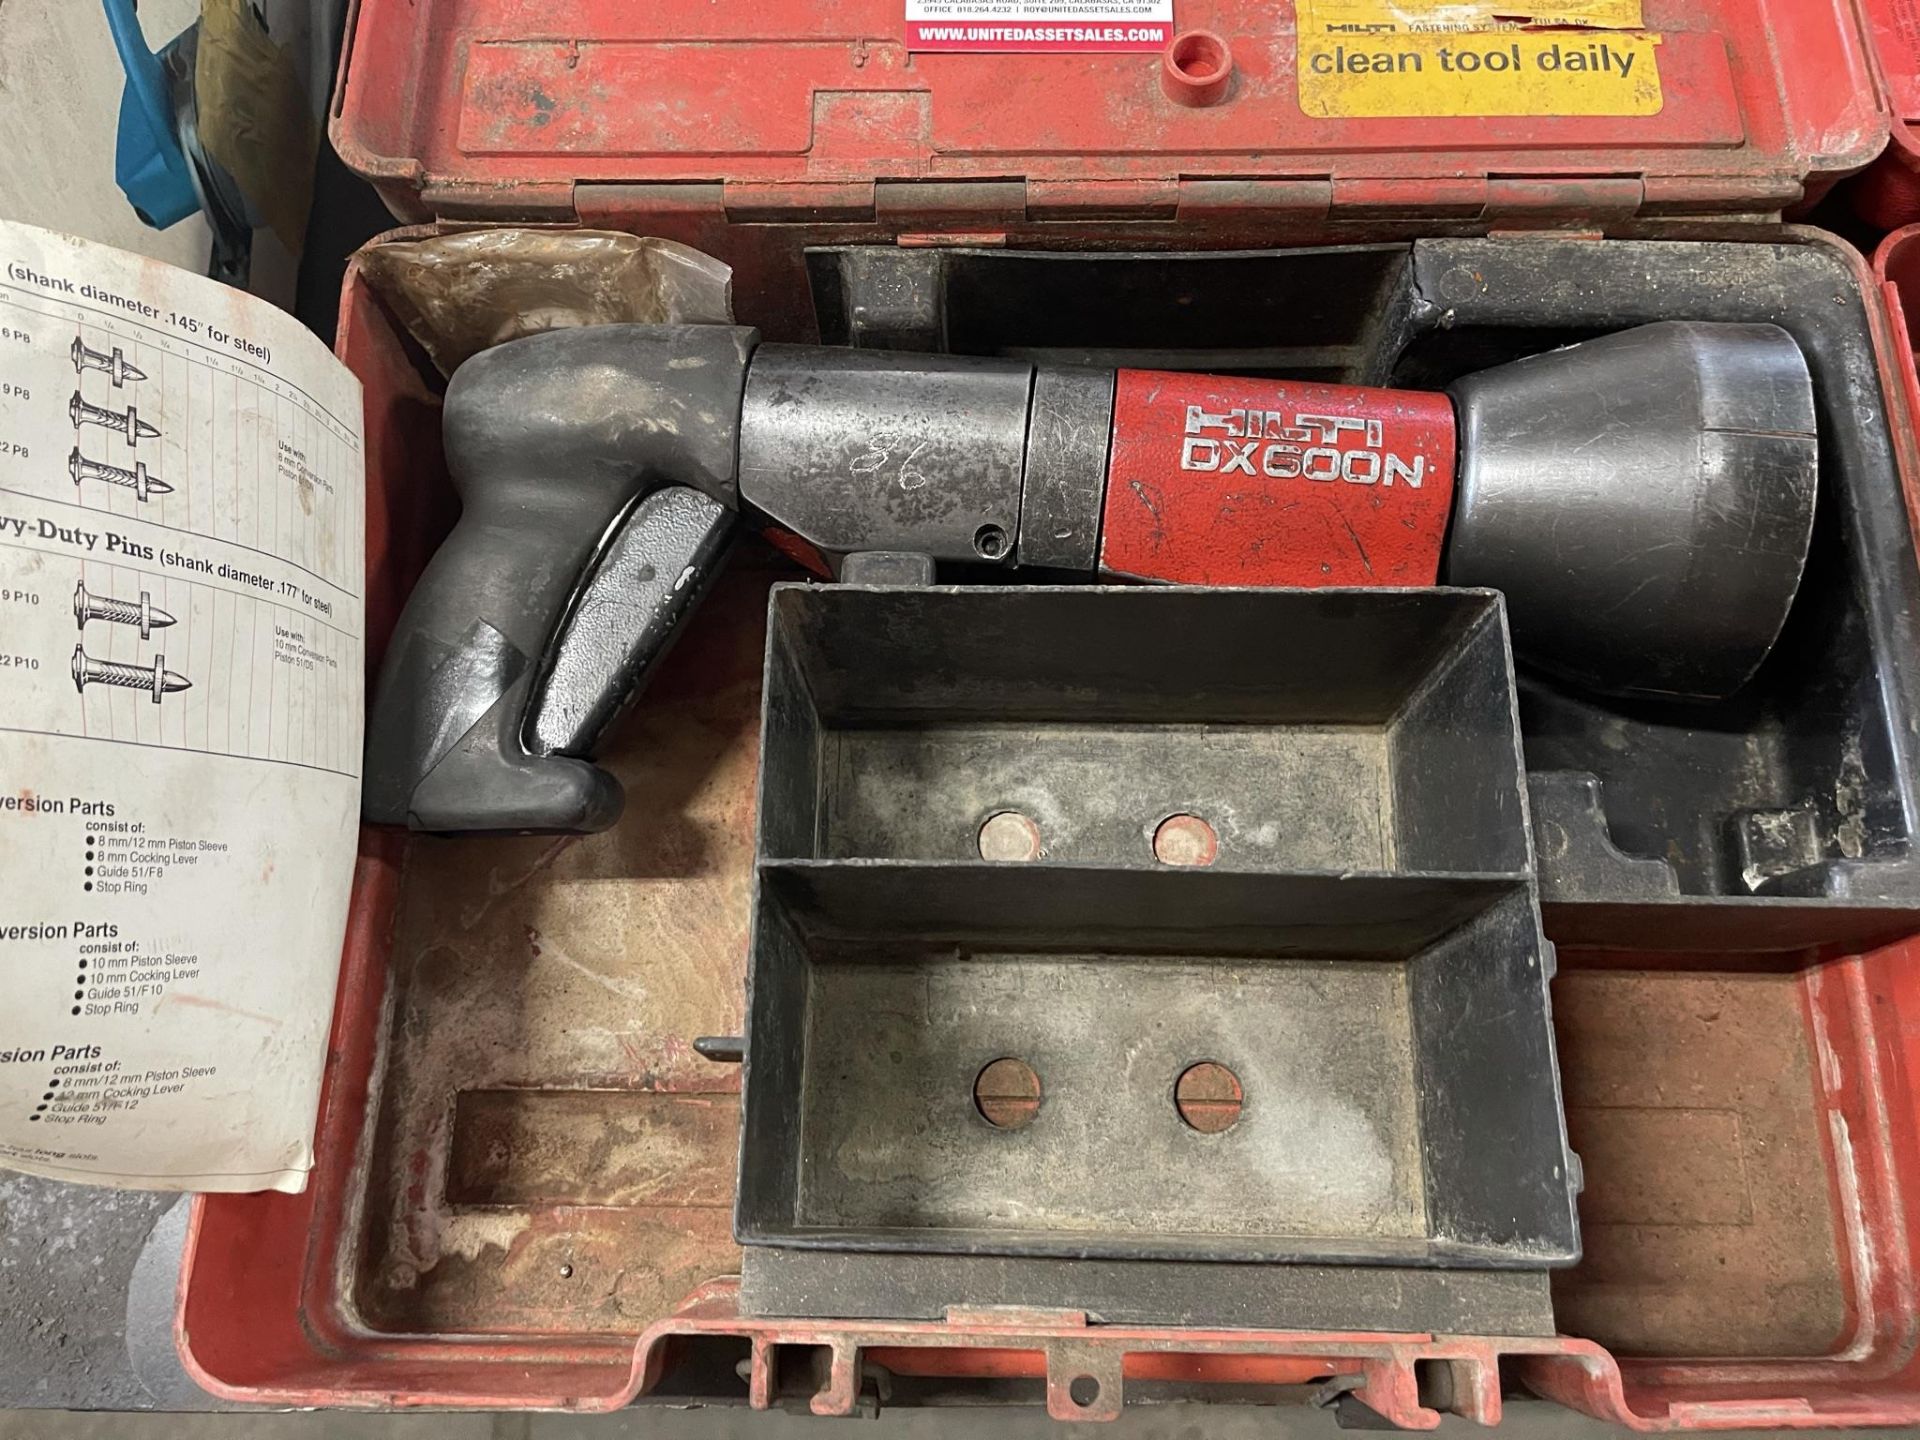 HILTI DX600N ACTUATED TOOL